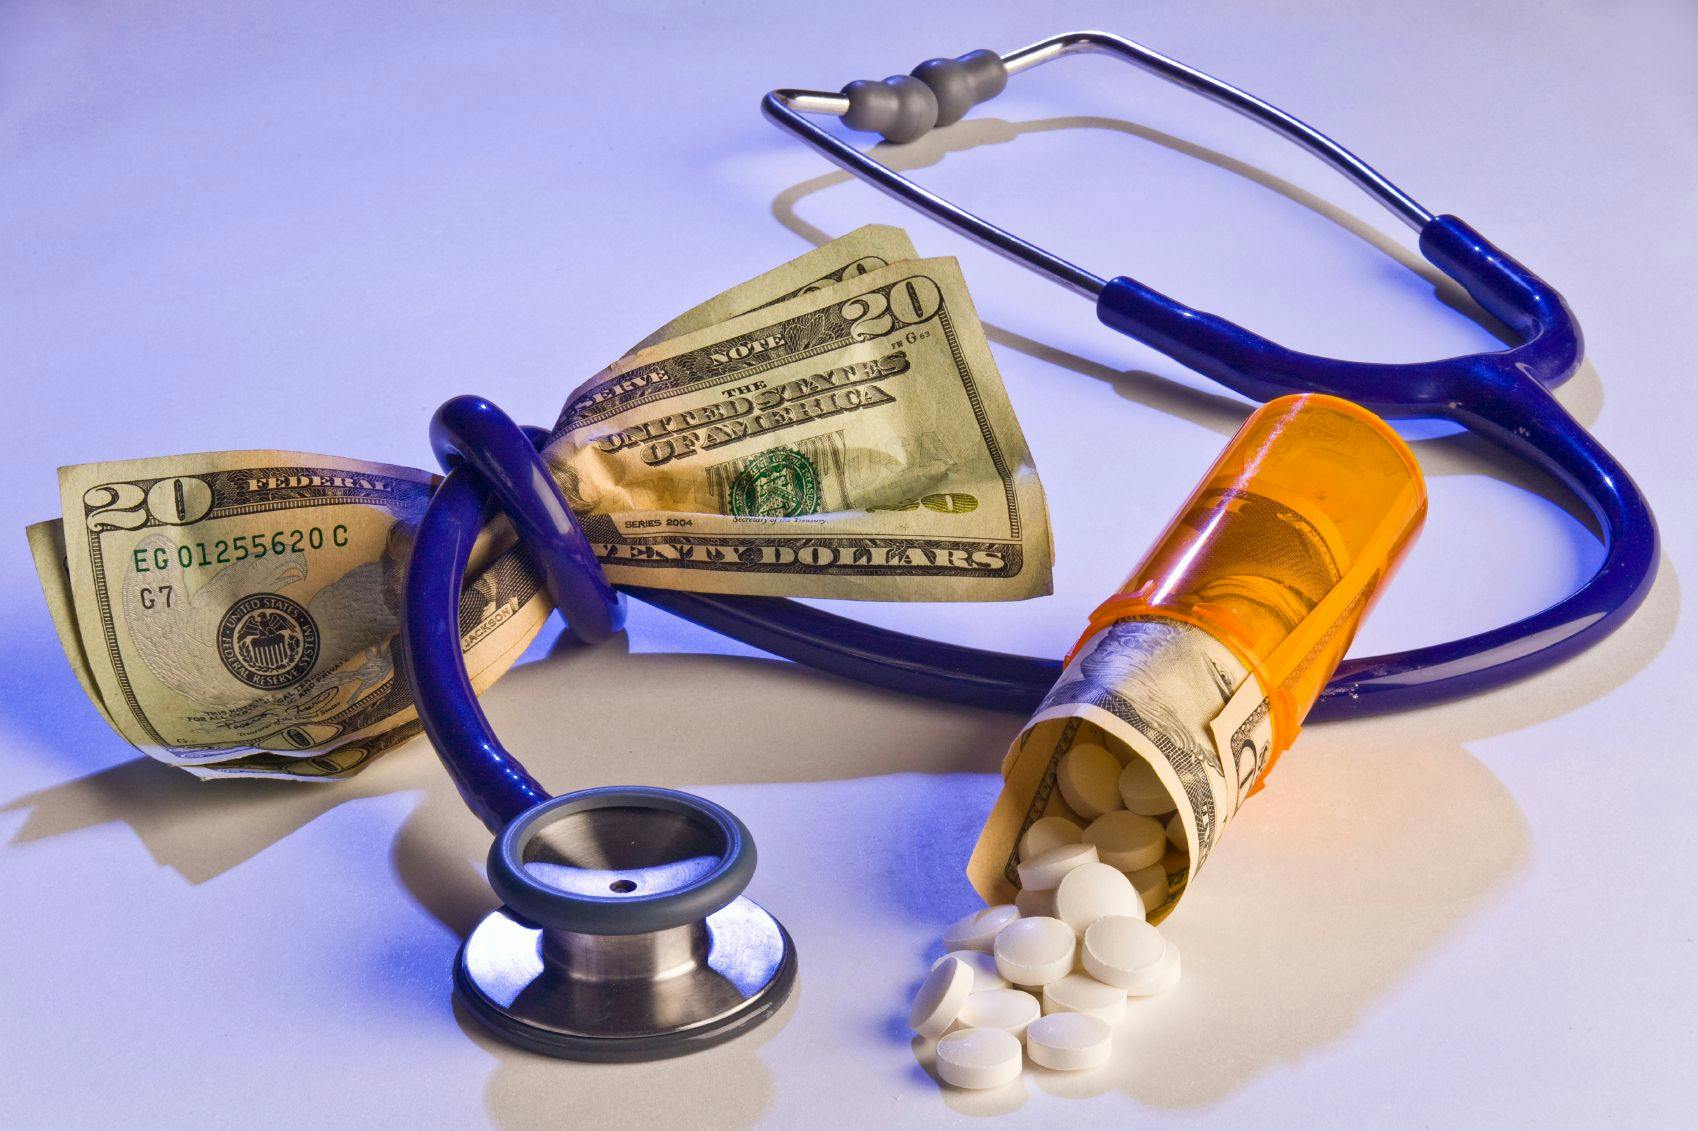 Cost of health care: money, pills, stethescope